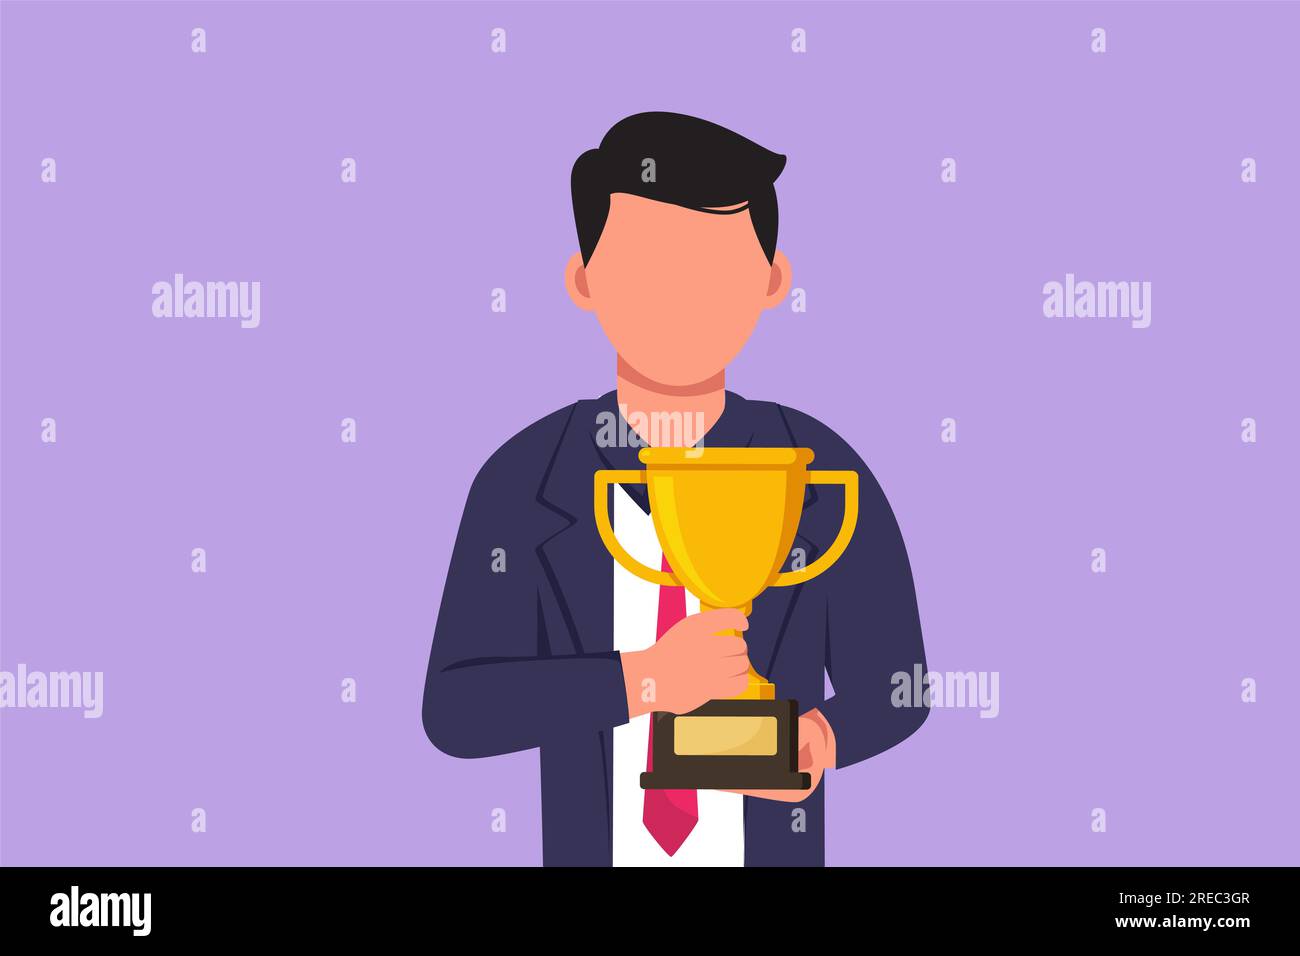 Cartoon flat style drawing happy businessman in suit and tie holding golden trophy with both hand in front of his chest. Winning business competition Stock Photo